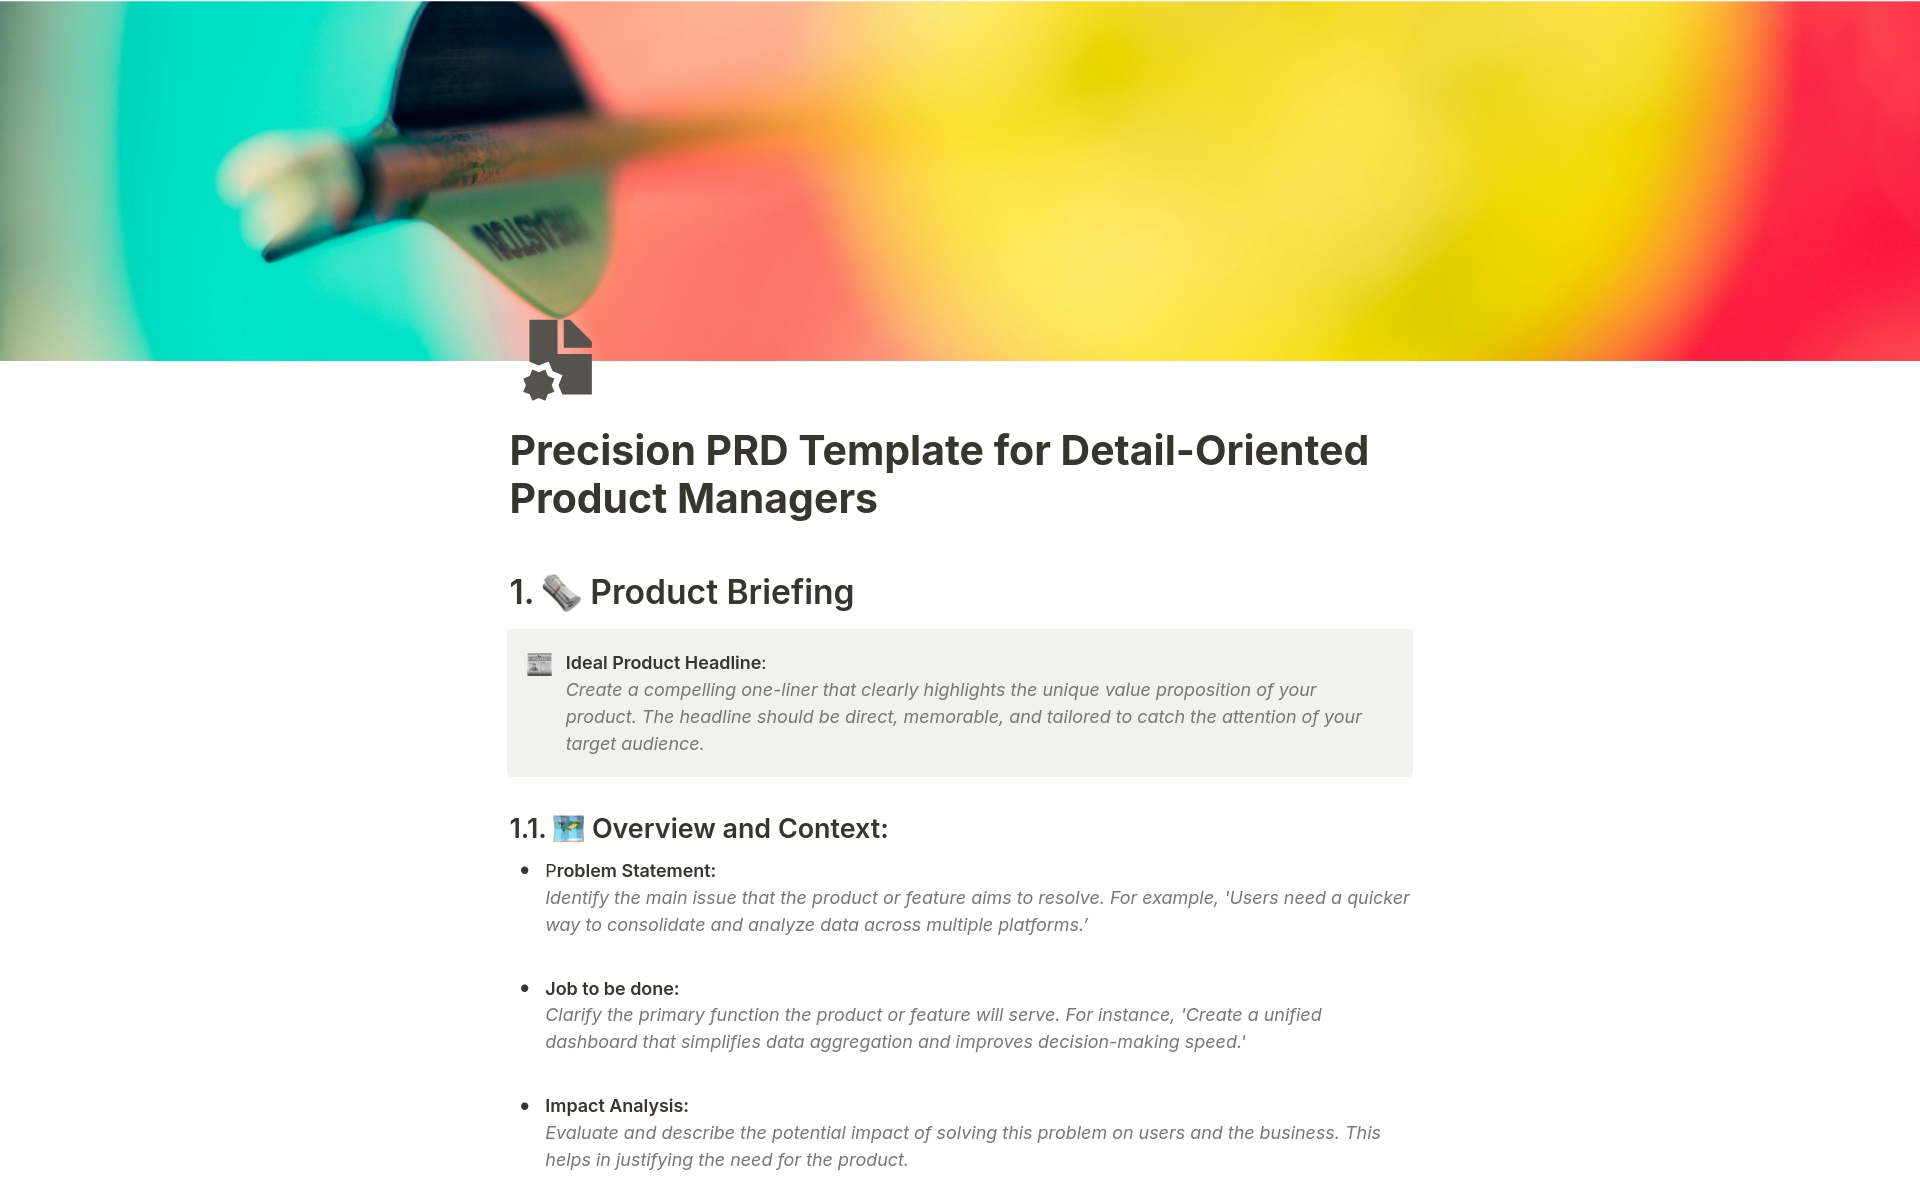 A template preview for Precision PRD Template for Detail-Oriented PMs